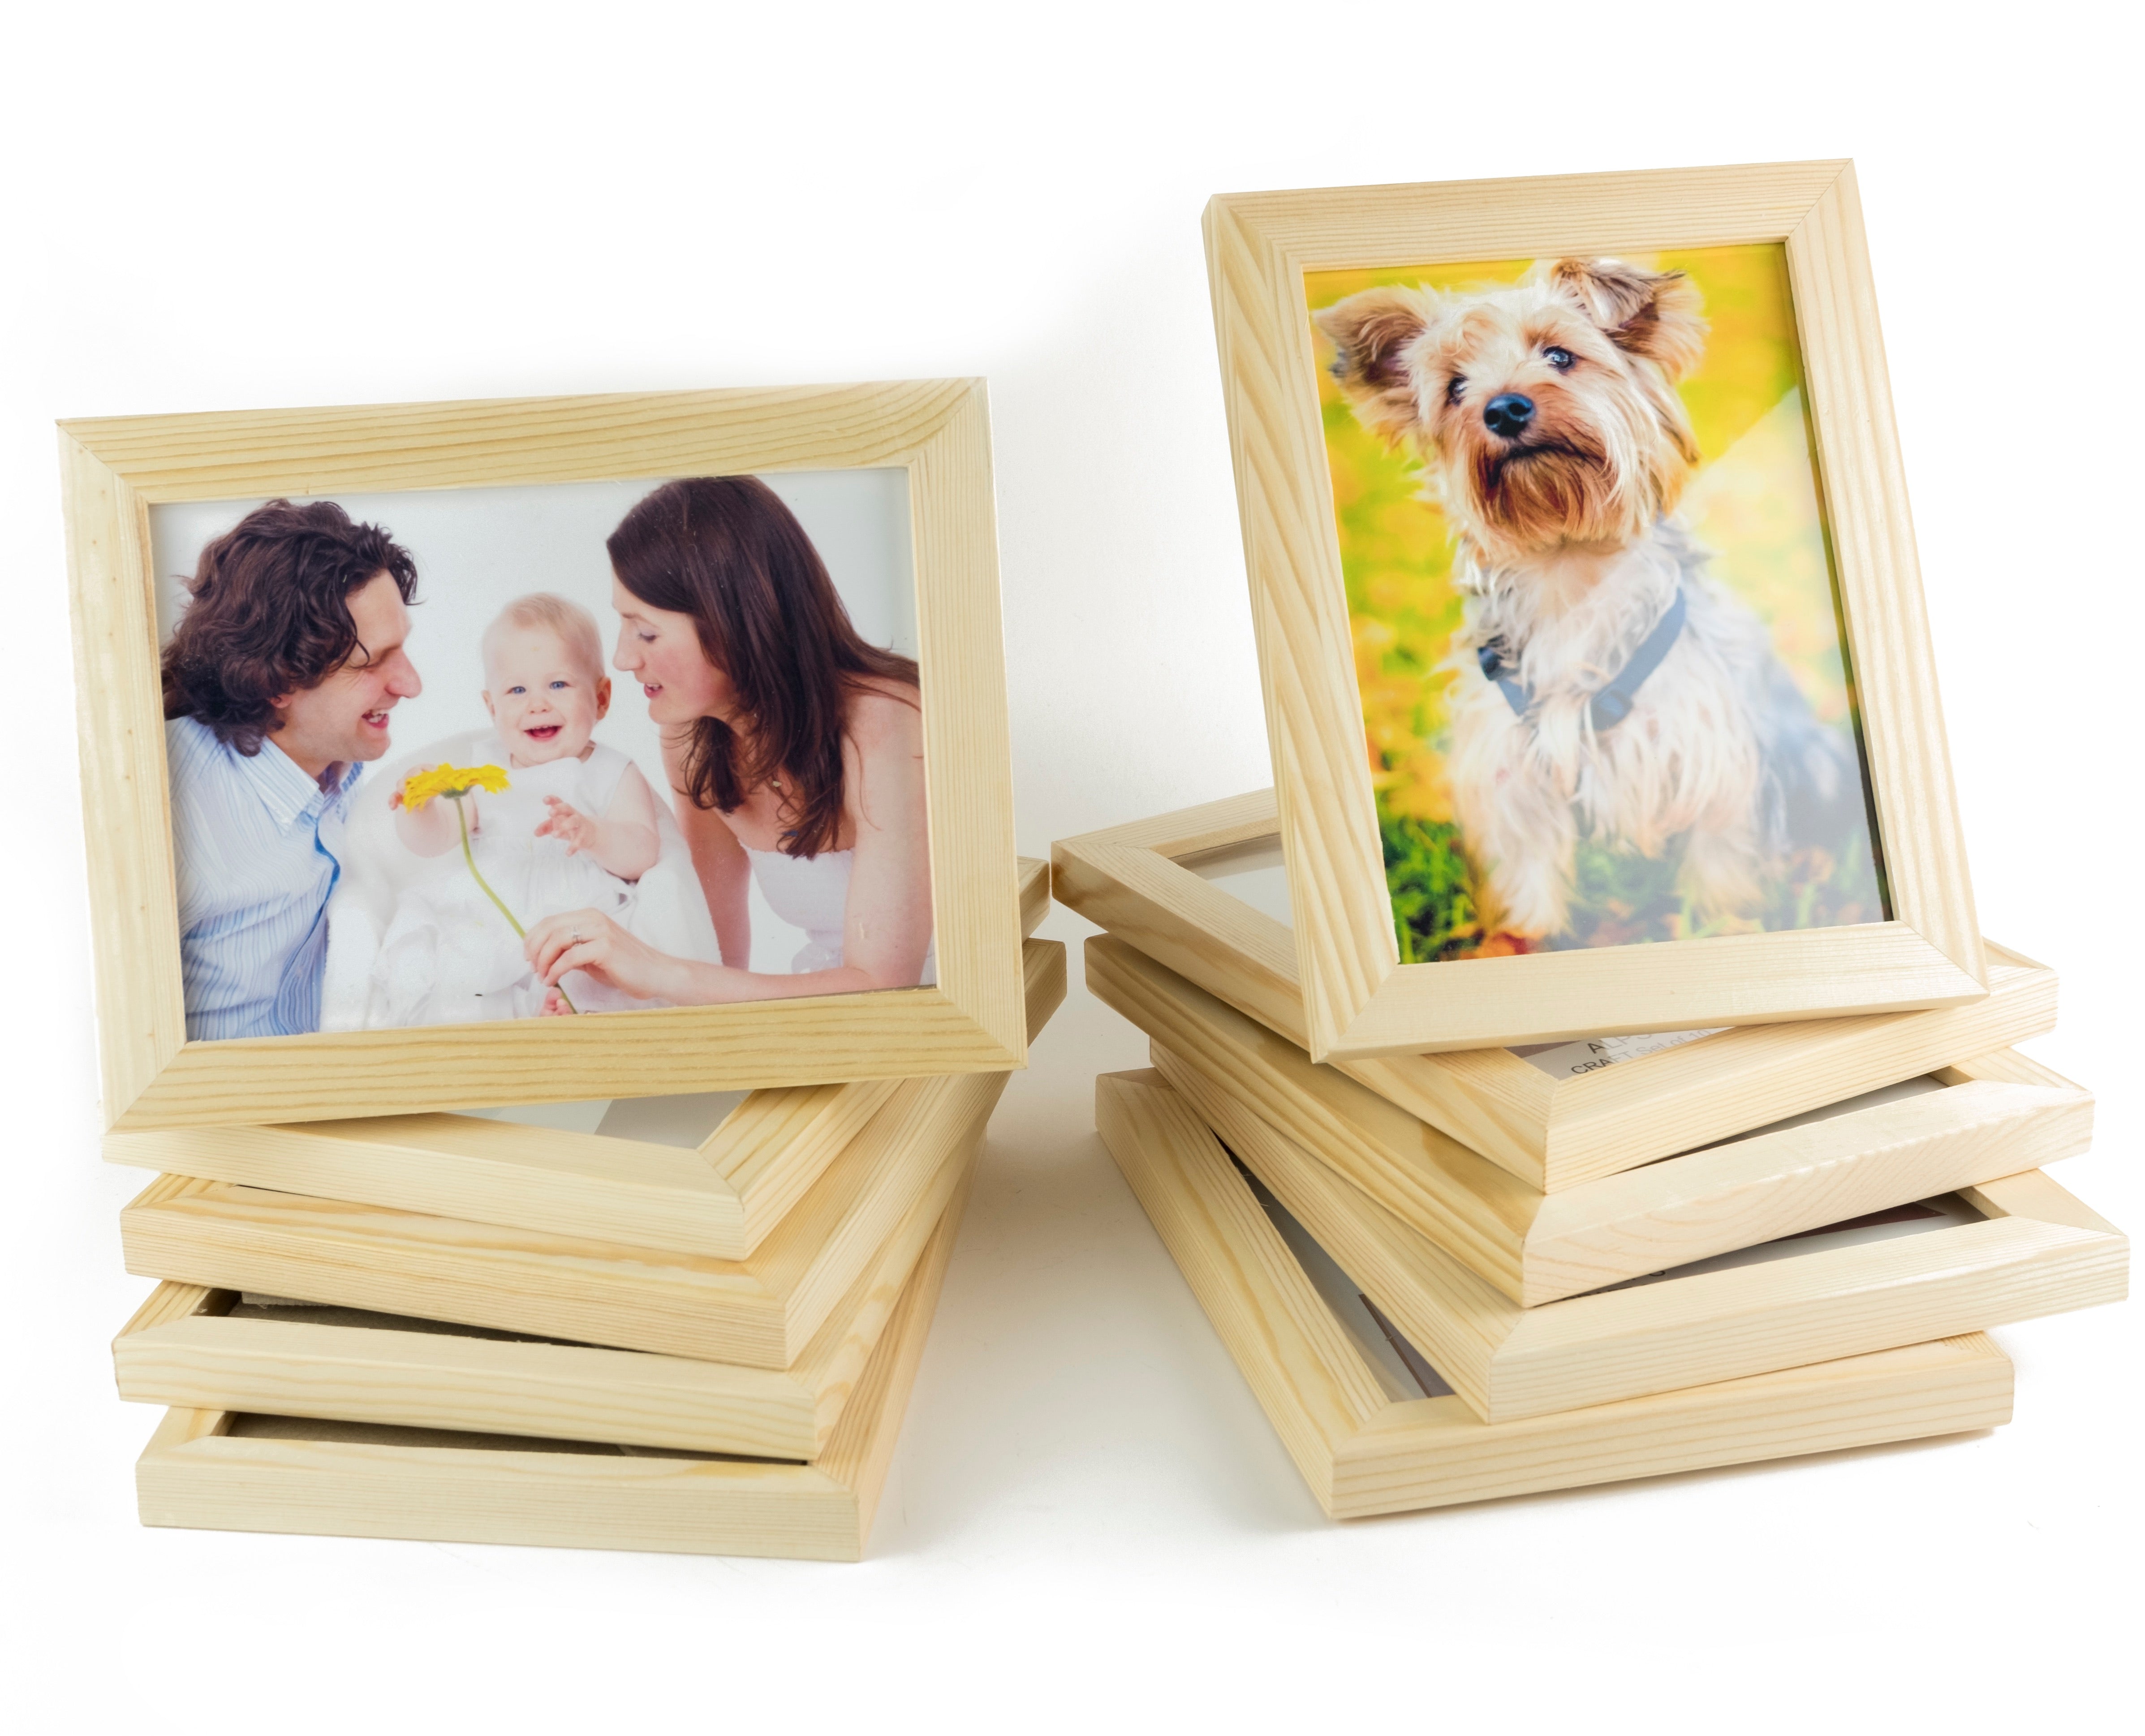 WOODALPS 4" x 6" Wooden Picture Frame - Set of 10 - Wallniture